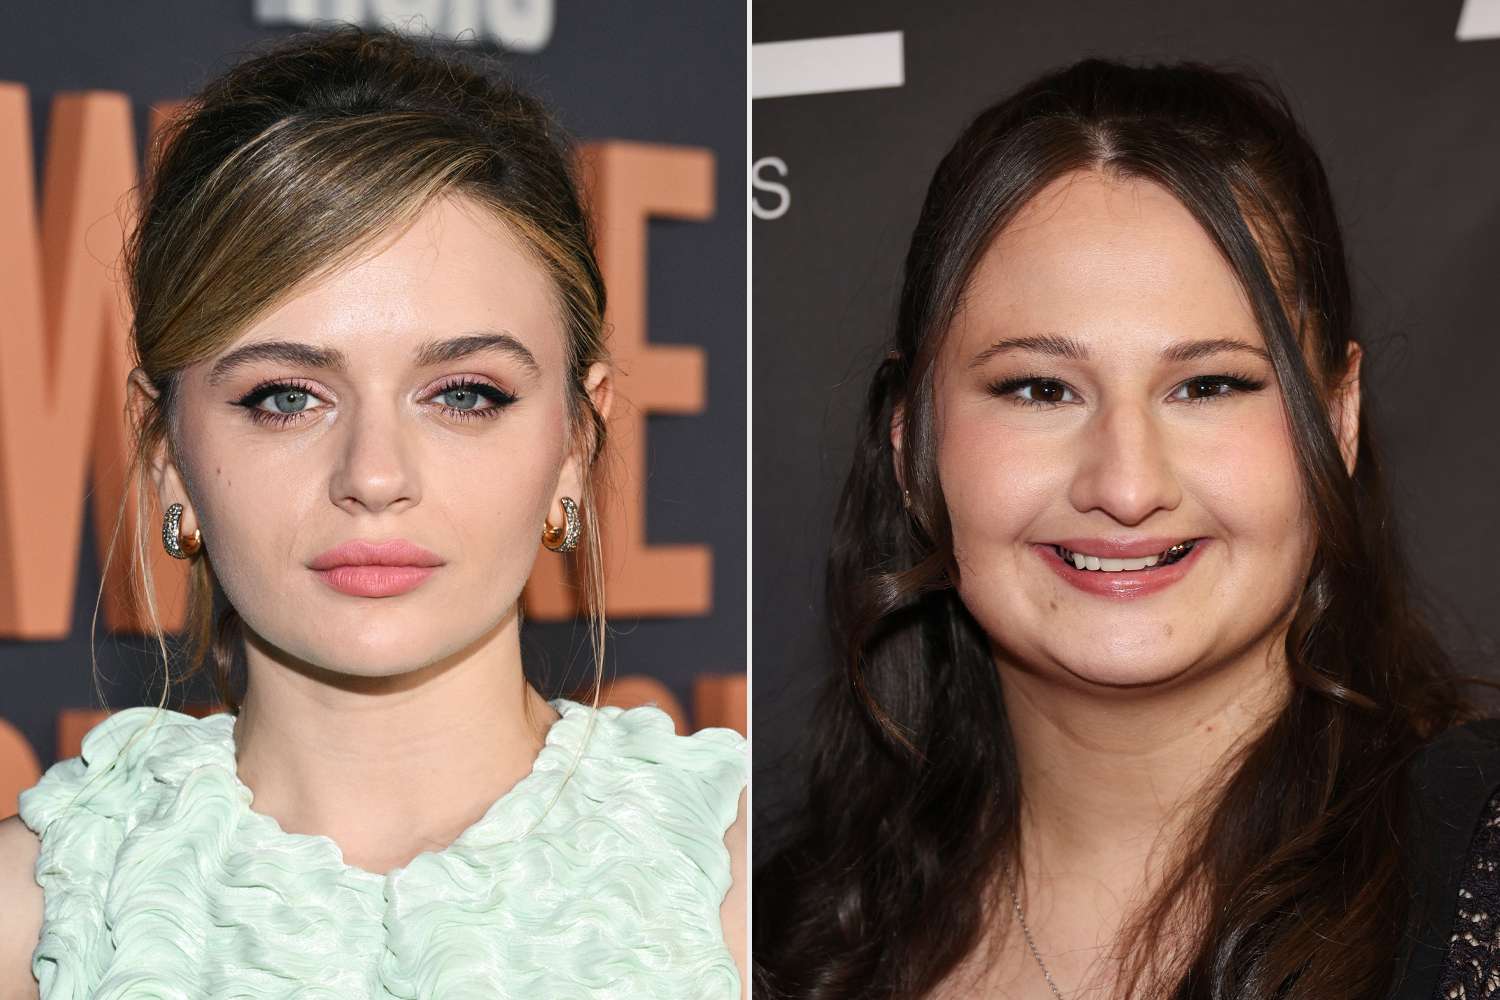 Joey King and Gypsy Rose